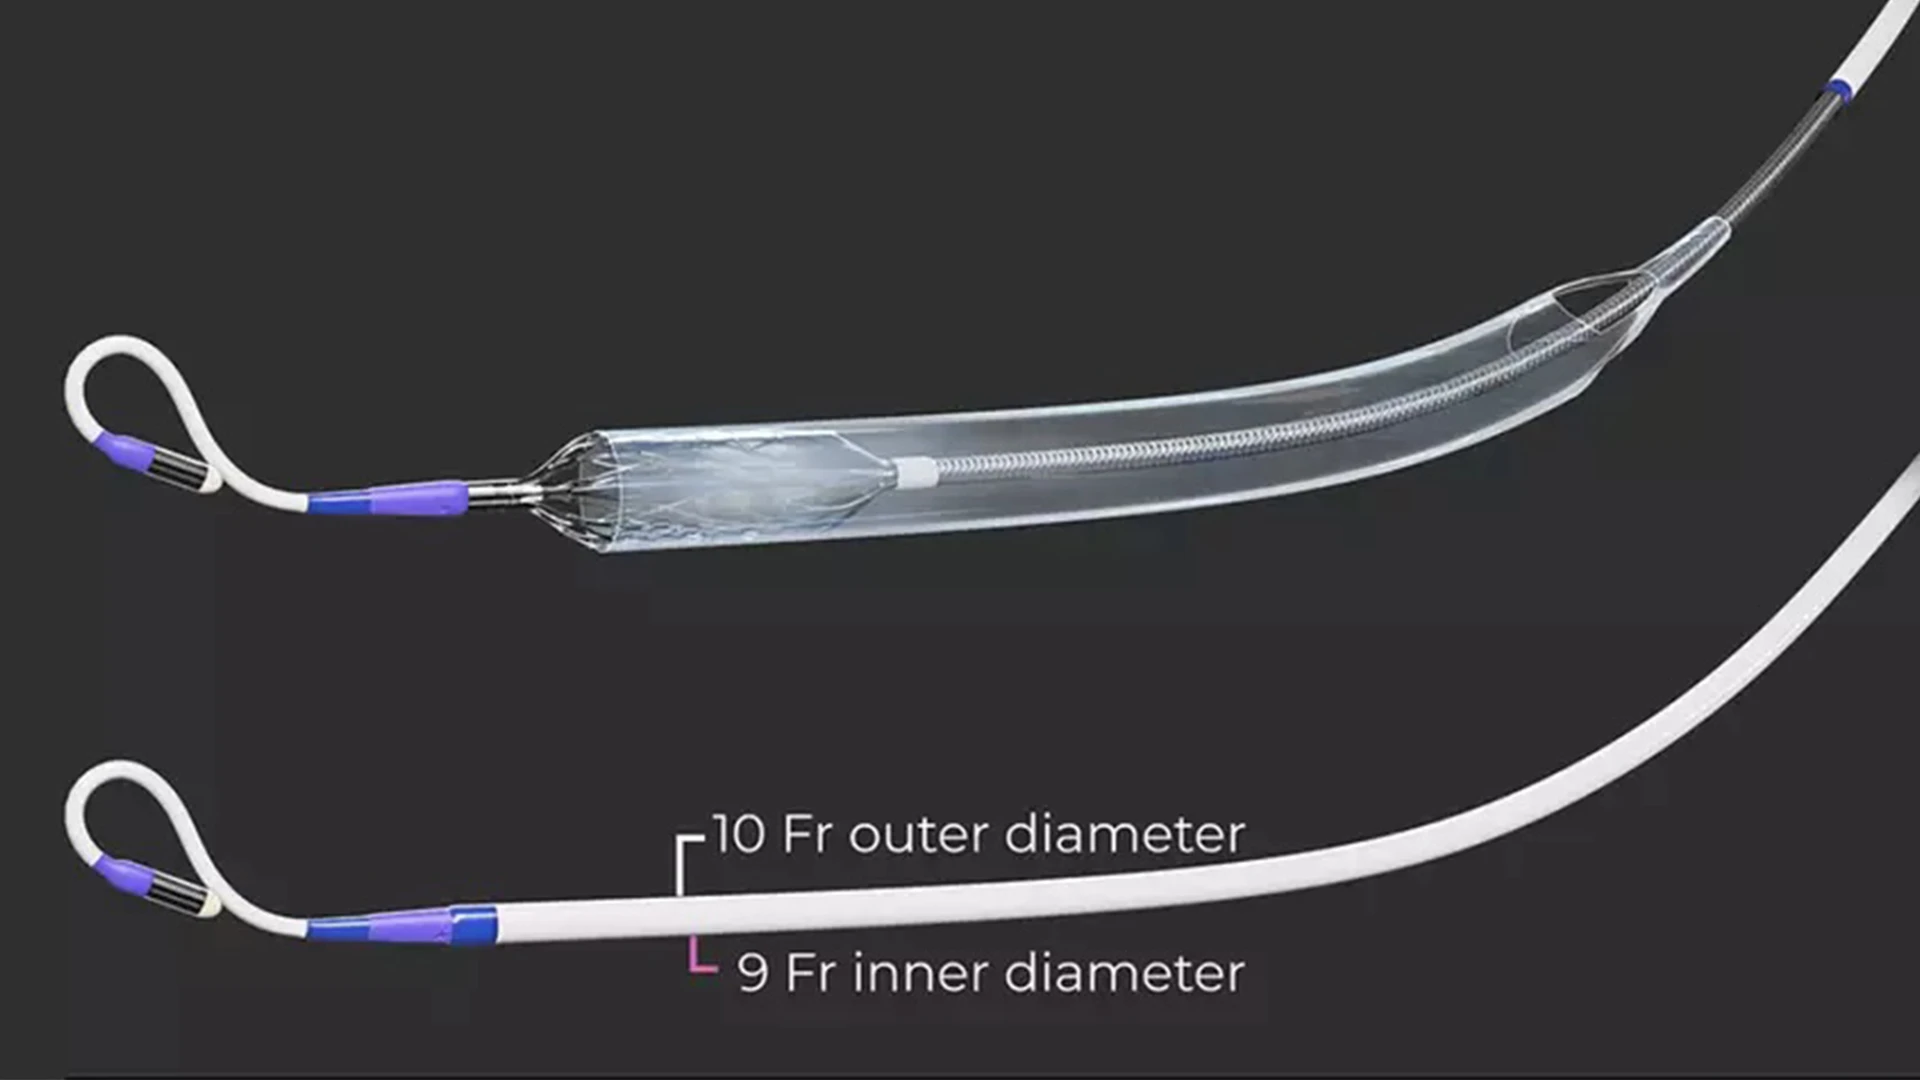 The miniaturized Elevate percutaneous left ventricular assist device provides cardiologists with a new tool to support high-risk patients during complex procedures.